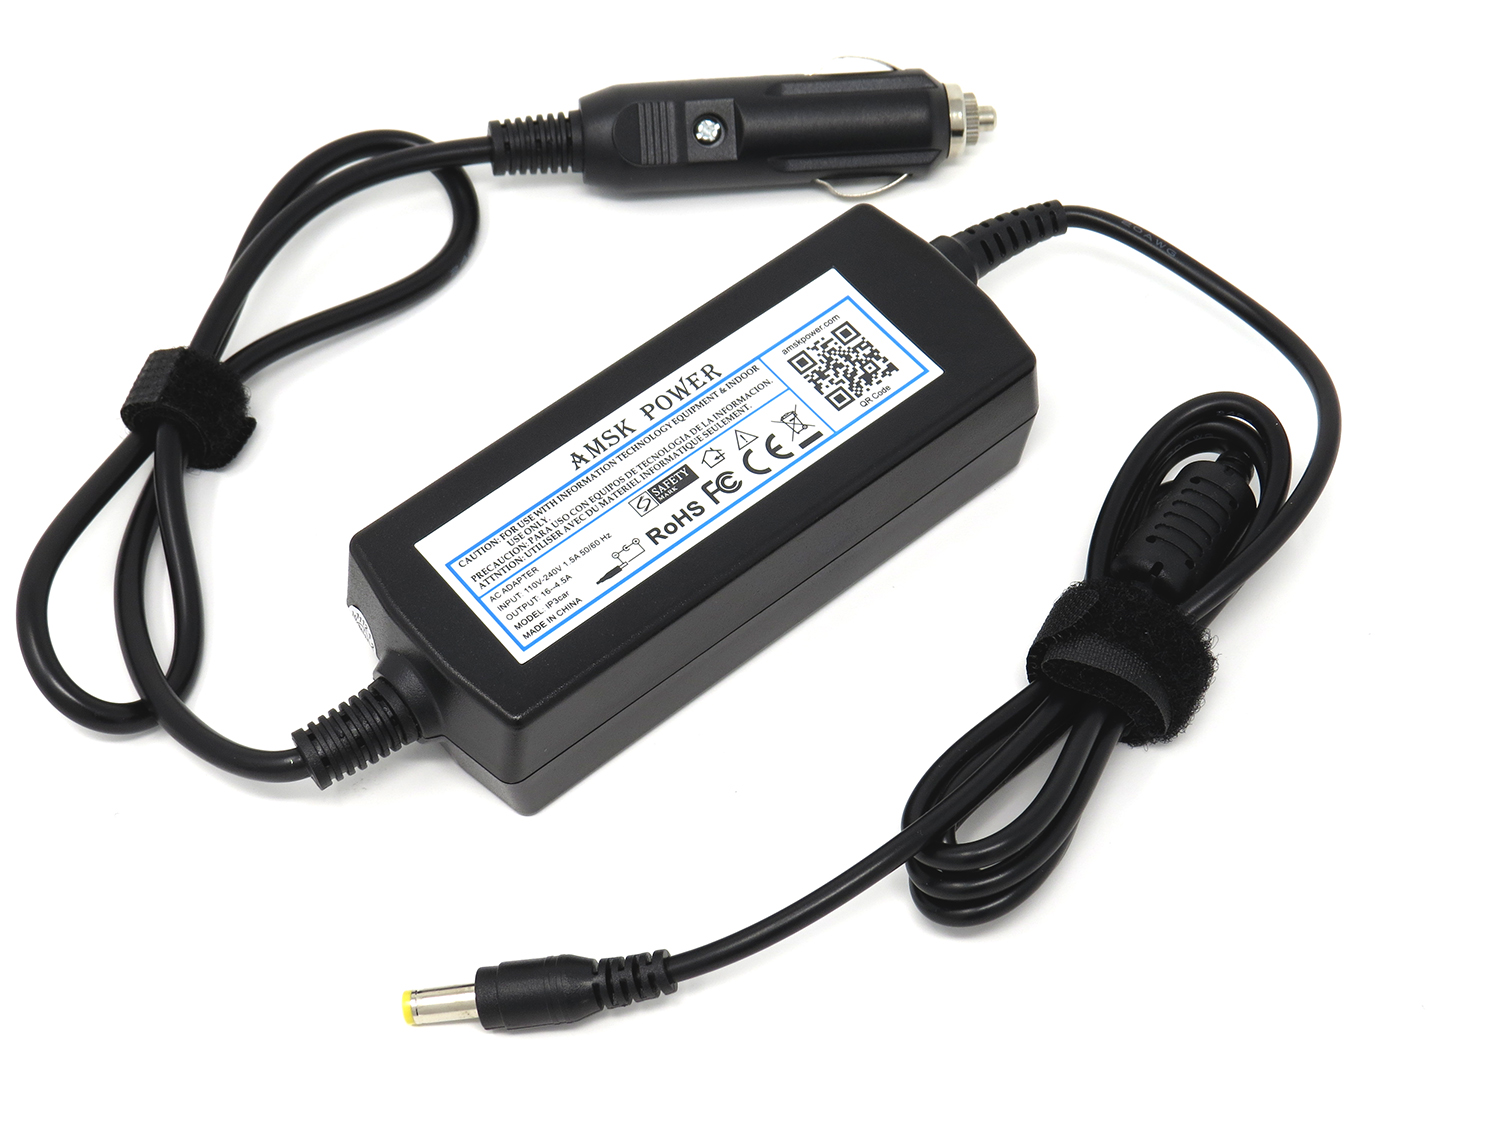 Car Charger for Panasonic Toughbook Cf-18 Cf-19 Cf-p1 Cf-r1 Cf-r2 Cf-t1 Cf-t2 Cf-t4 Cf-t5 Cf-w2 Cf-w2a Cf-w2d Battery Power Supply Cord - image 1 of 2